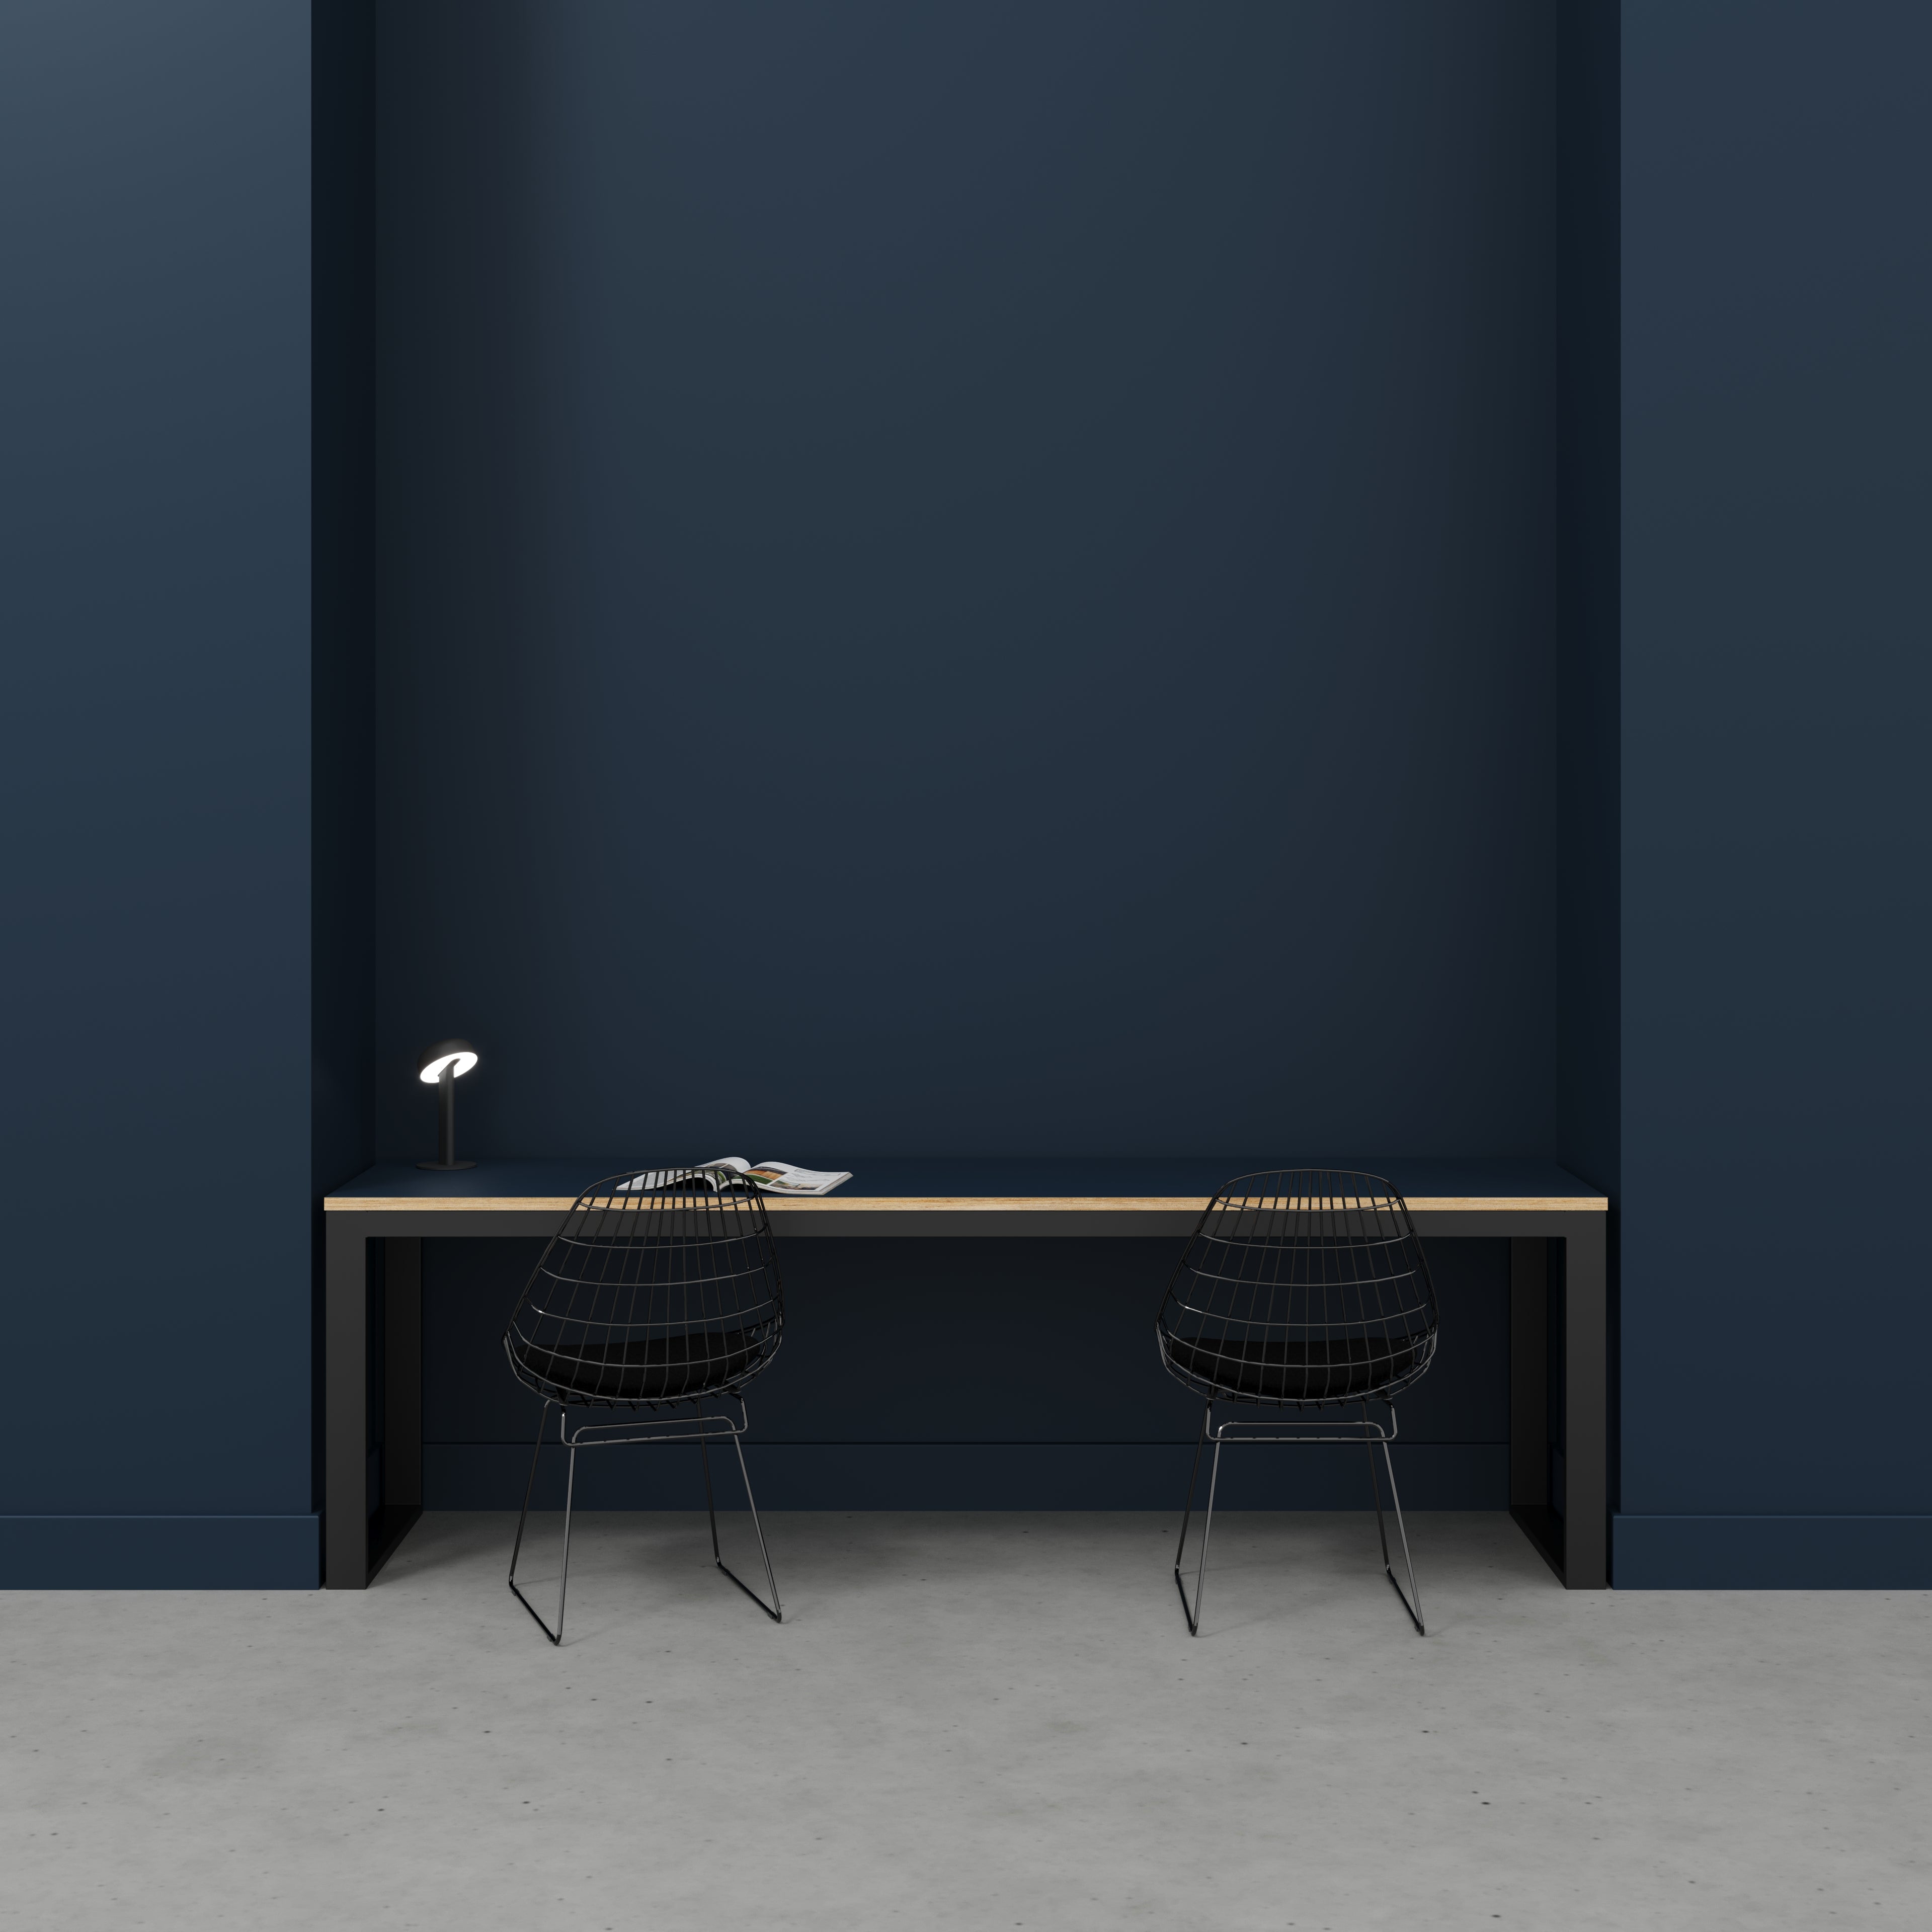 Desk with Black Industrial Frame - Formica Night Sea Blue - 2400(w) x 585(d) x 735(h)